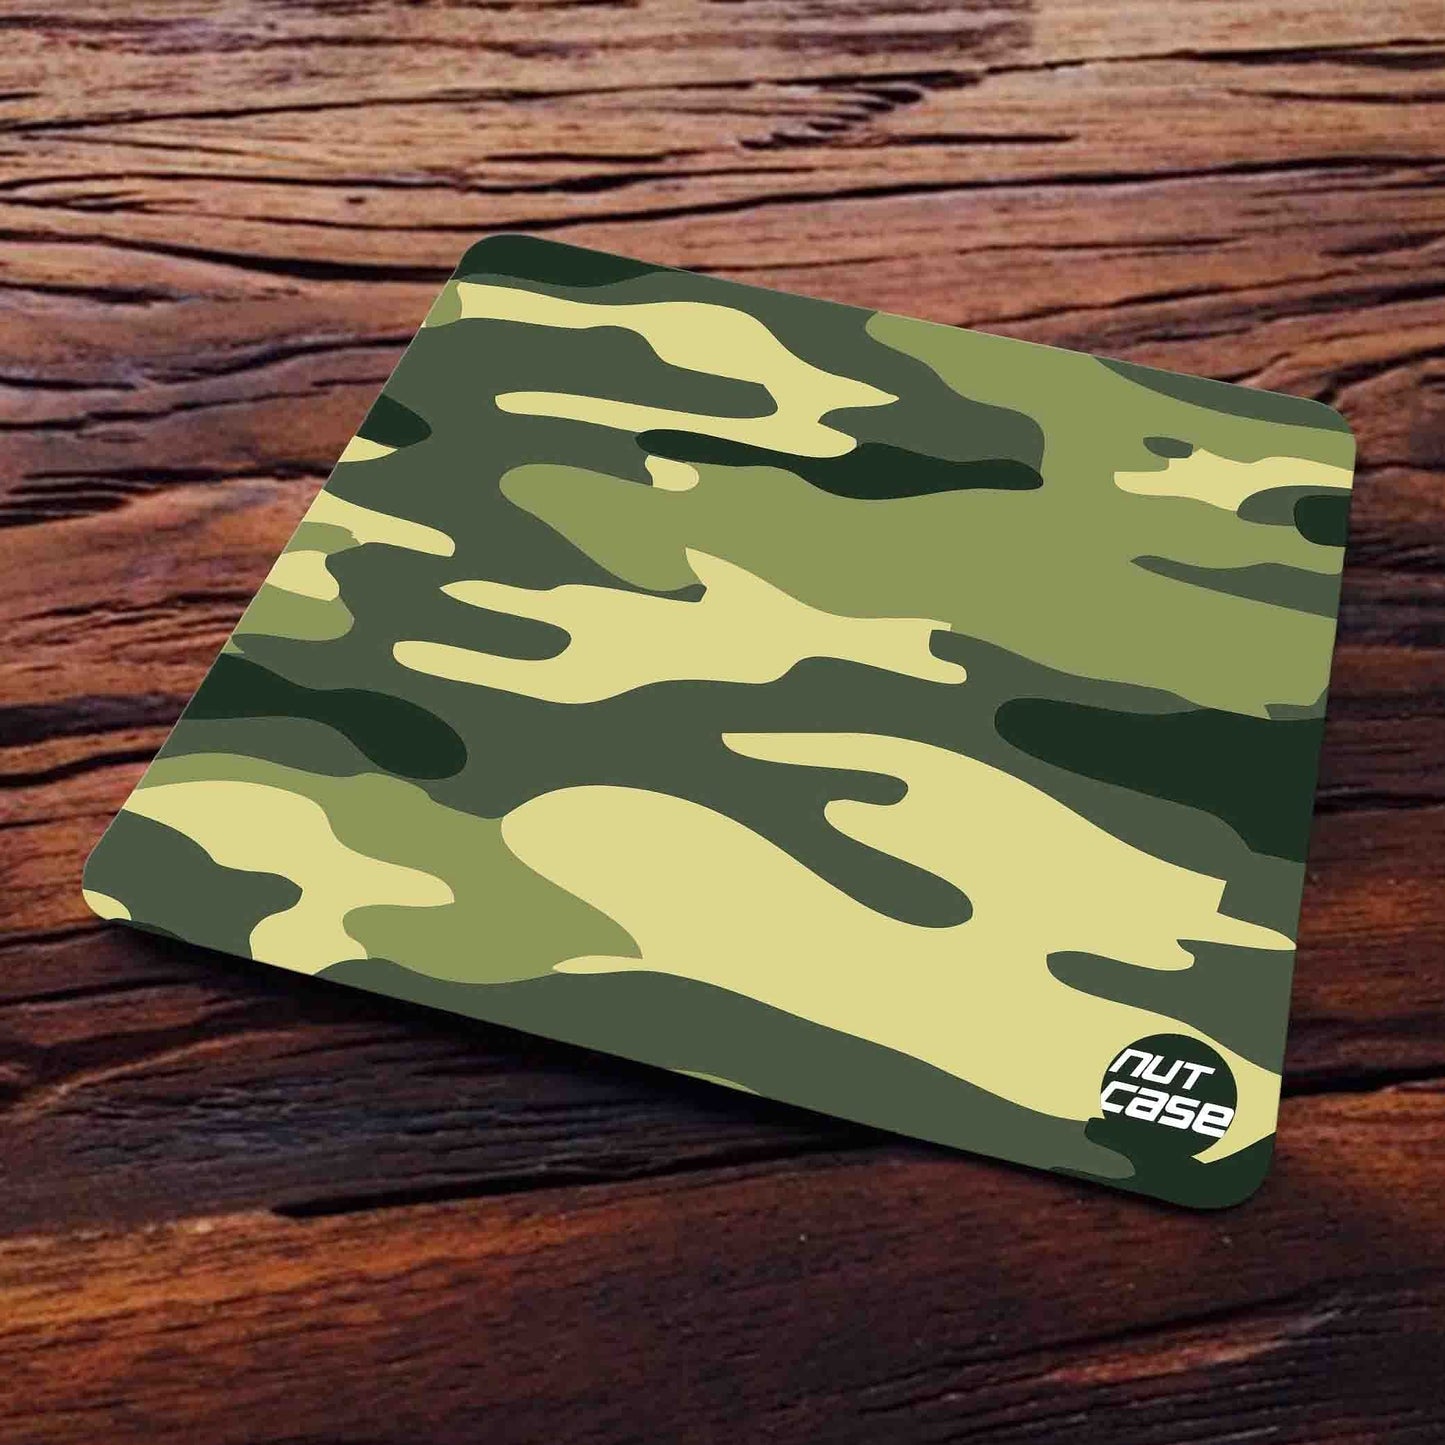 Metal Best Beer Coaster Pack of 6 for Hotel & Restaurant - Army Camo Nutcase